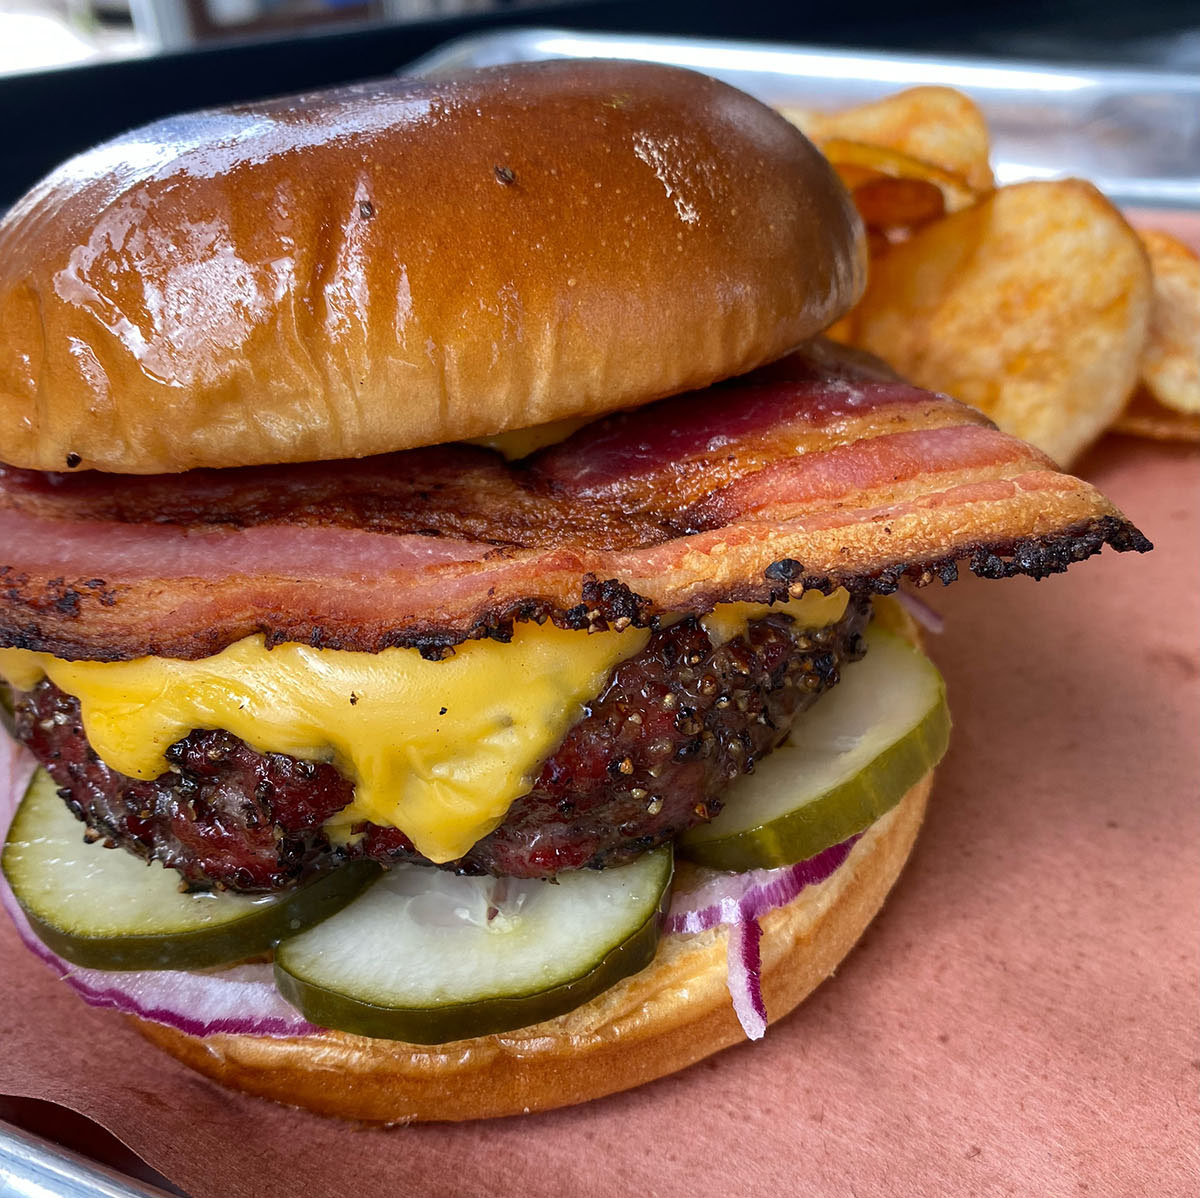 A burger piled high with green pickles, a slab of beef with cheese, a piece of bacon and a golden bun